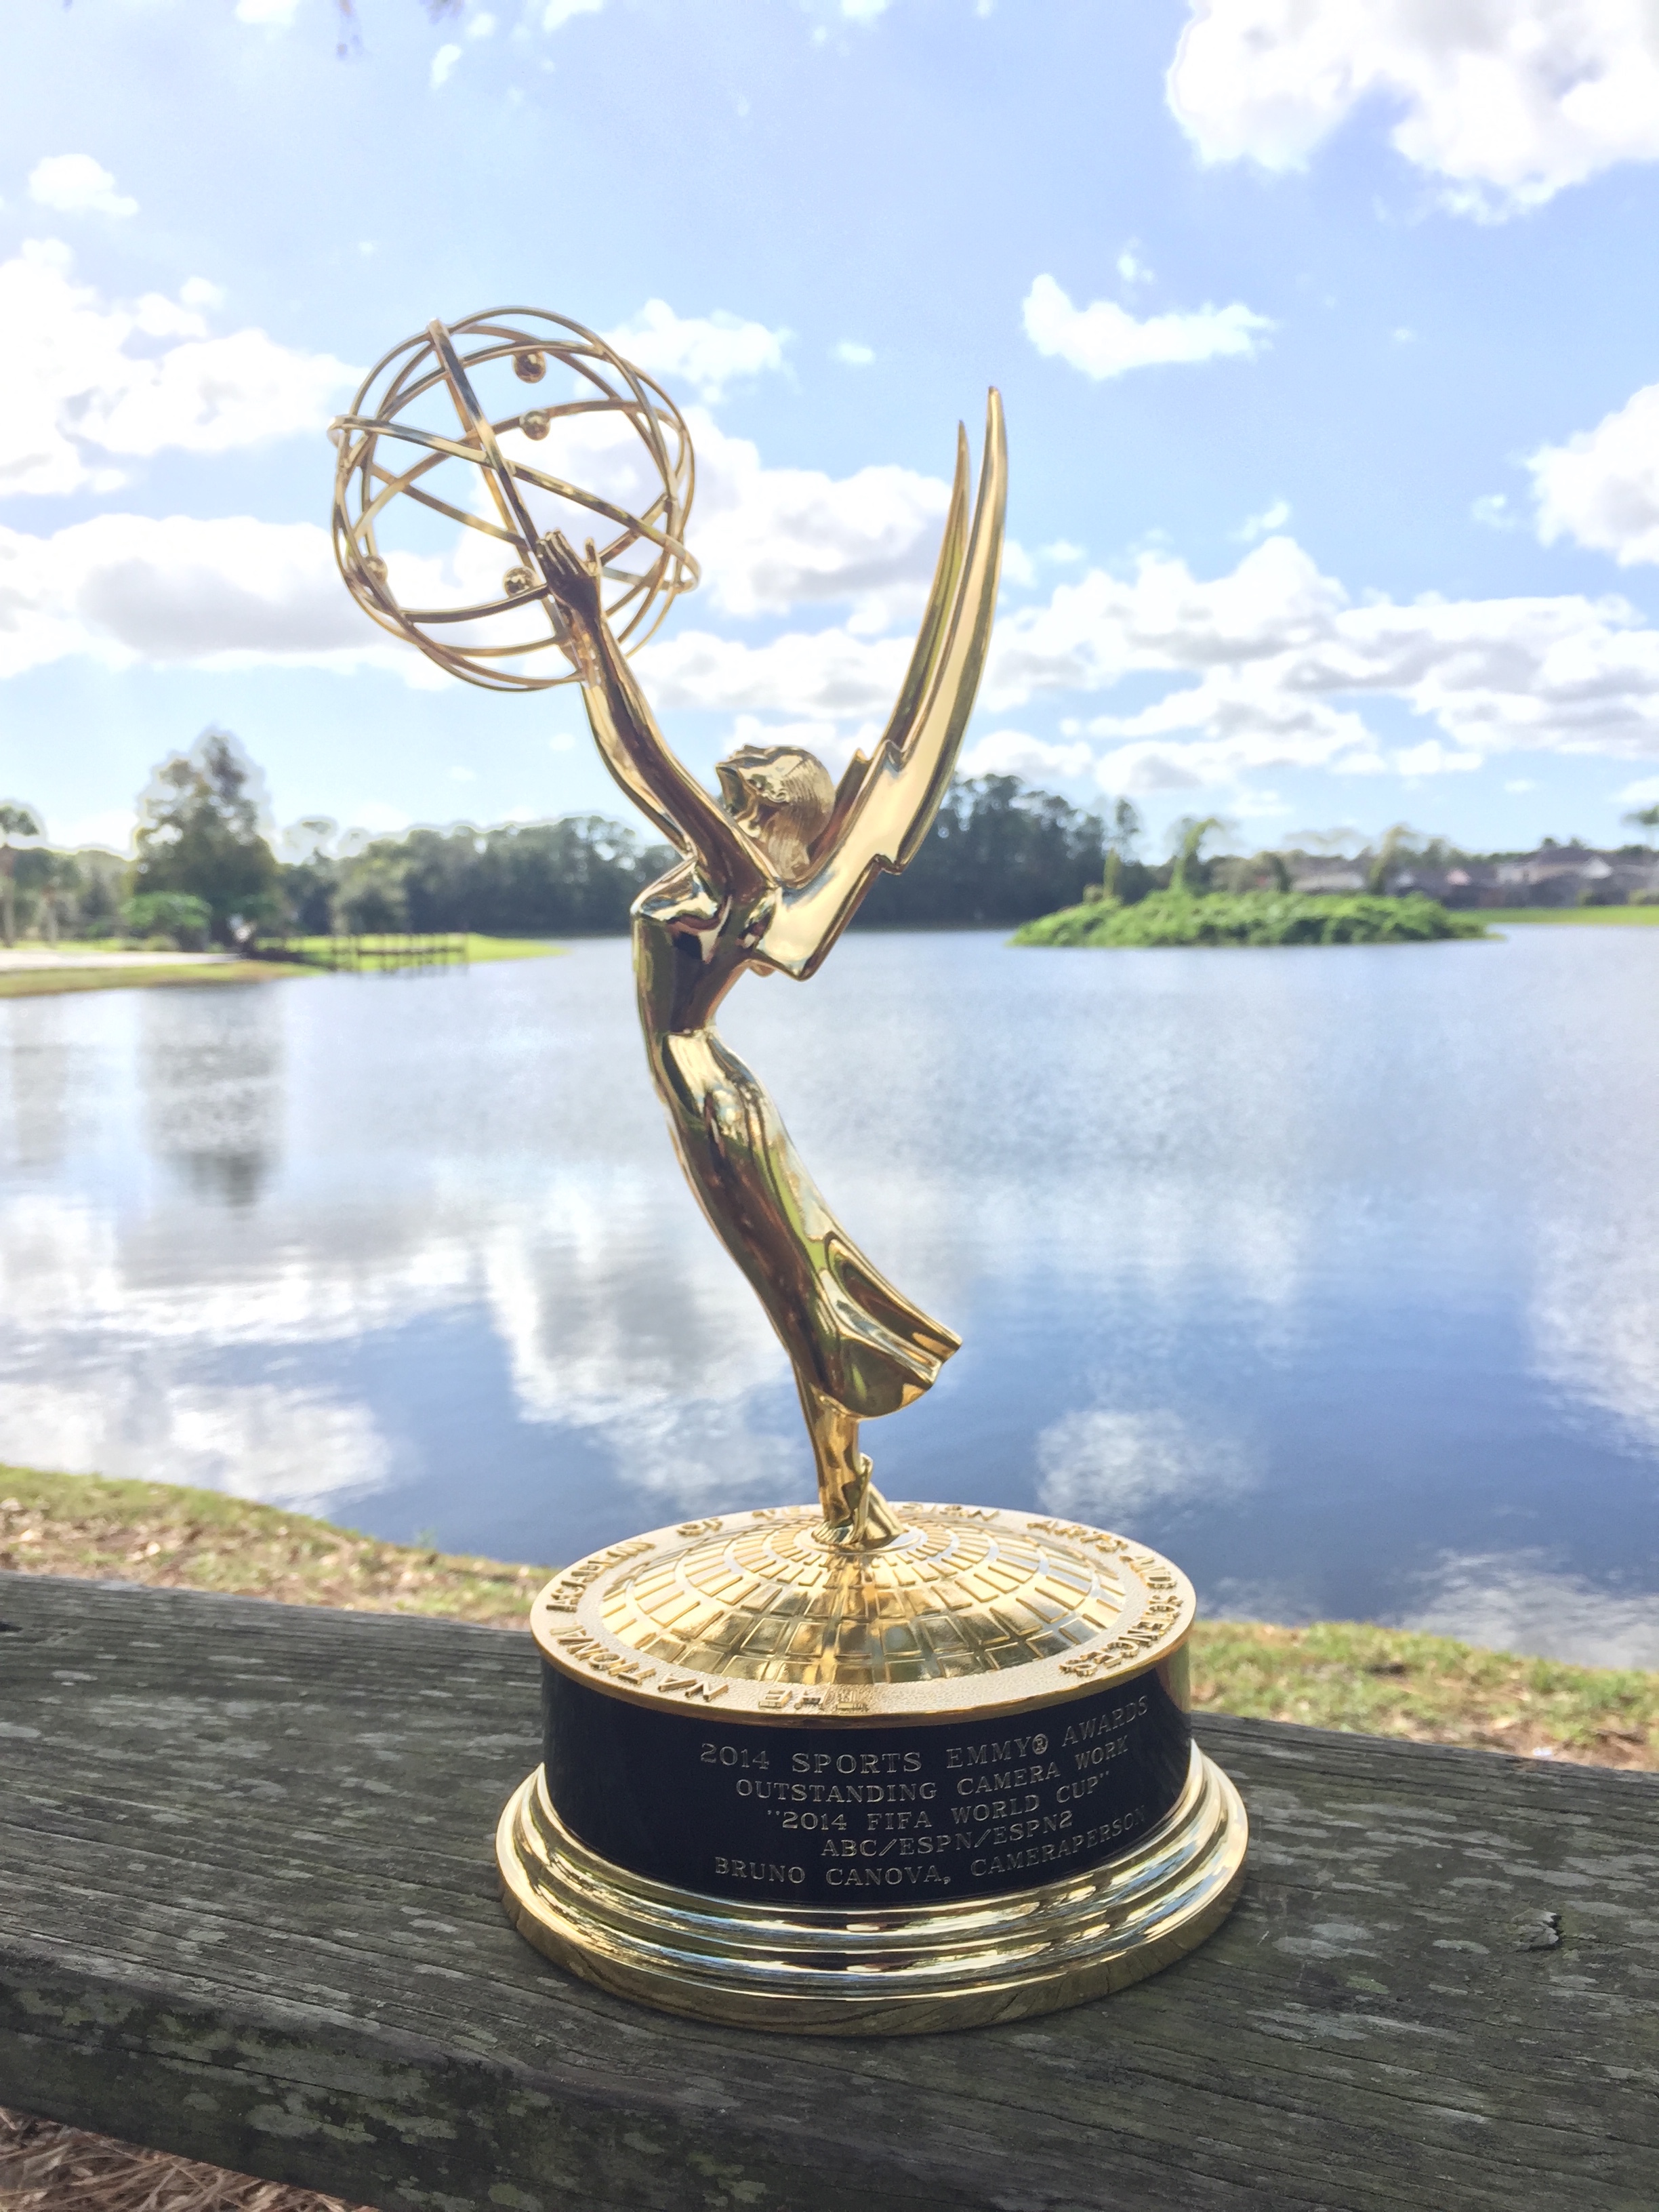 2014 Sports Emmy® Awards by Outstanding Camera Work (2014 FIFA World Cup - ABC/ESPN/ESPN2)